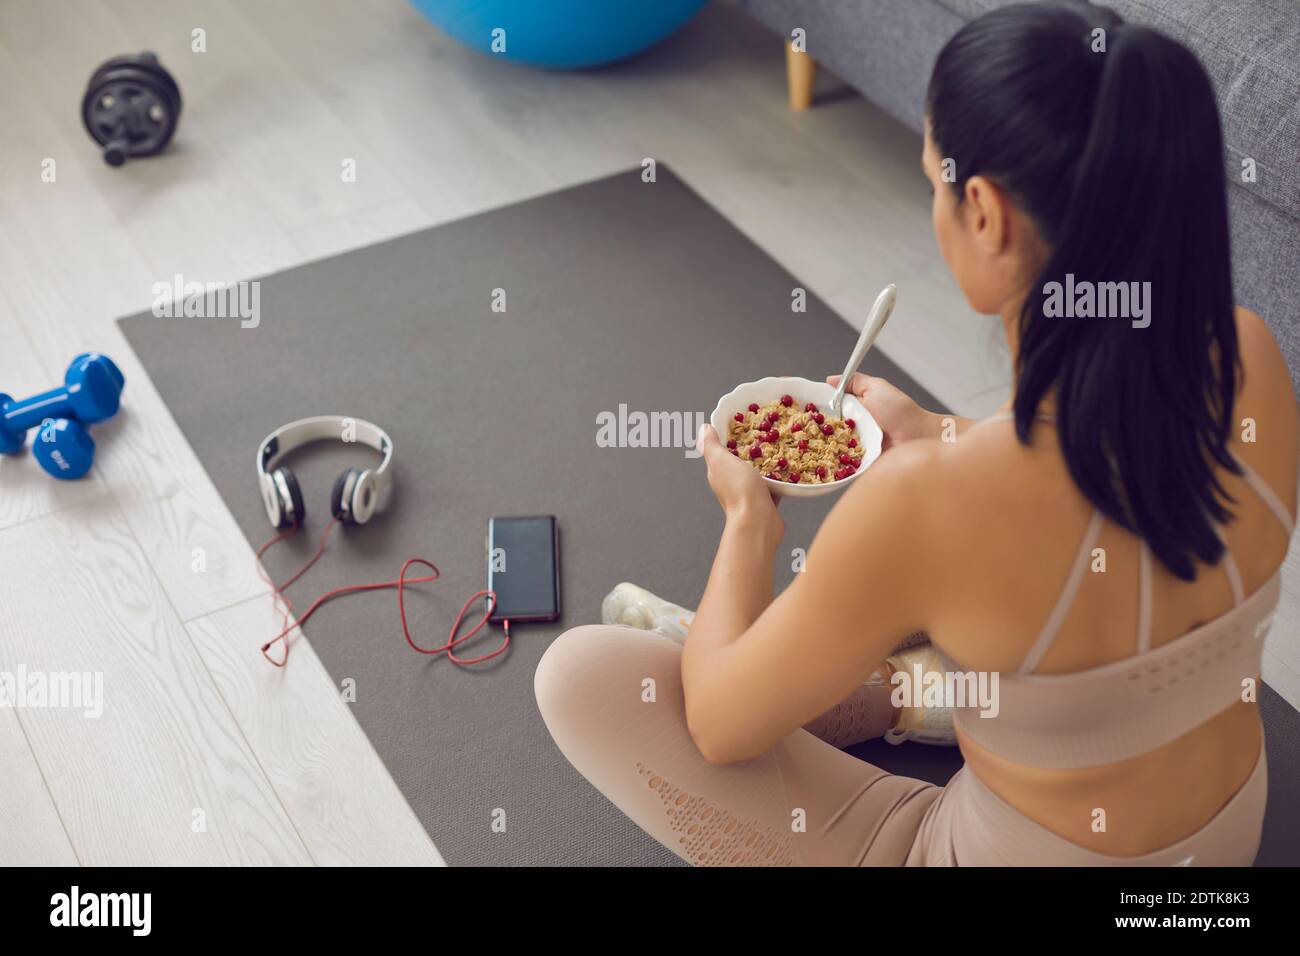 Woman relaxing on fitness mat and having healthy snack after sports workout at home Stock Photo